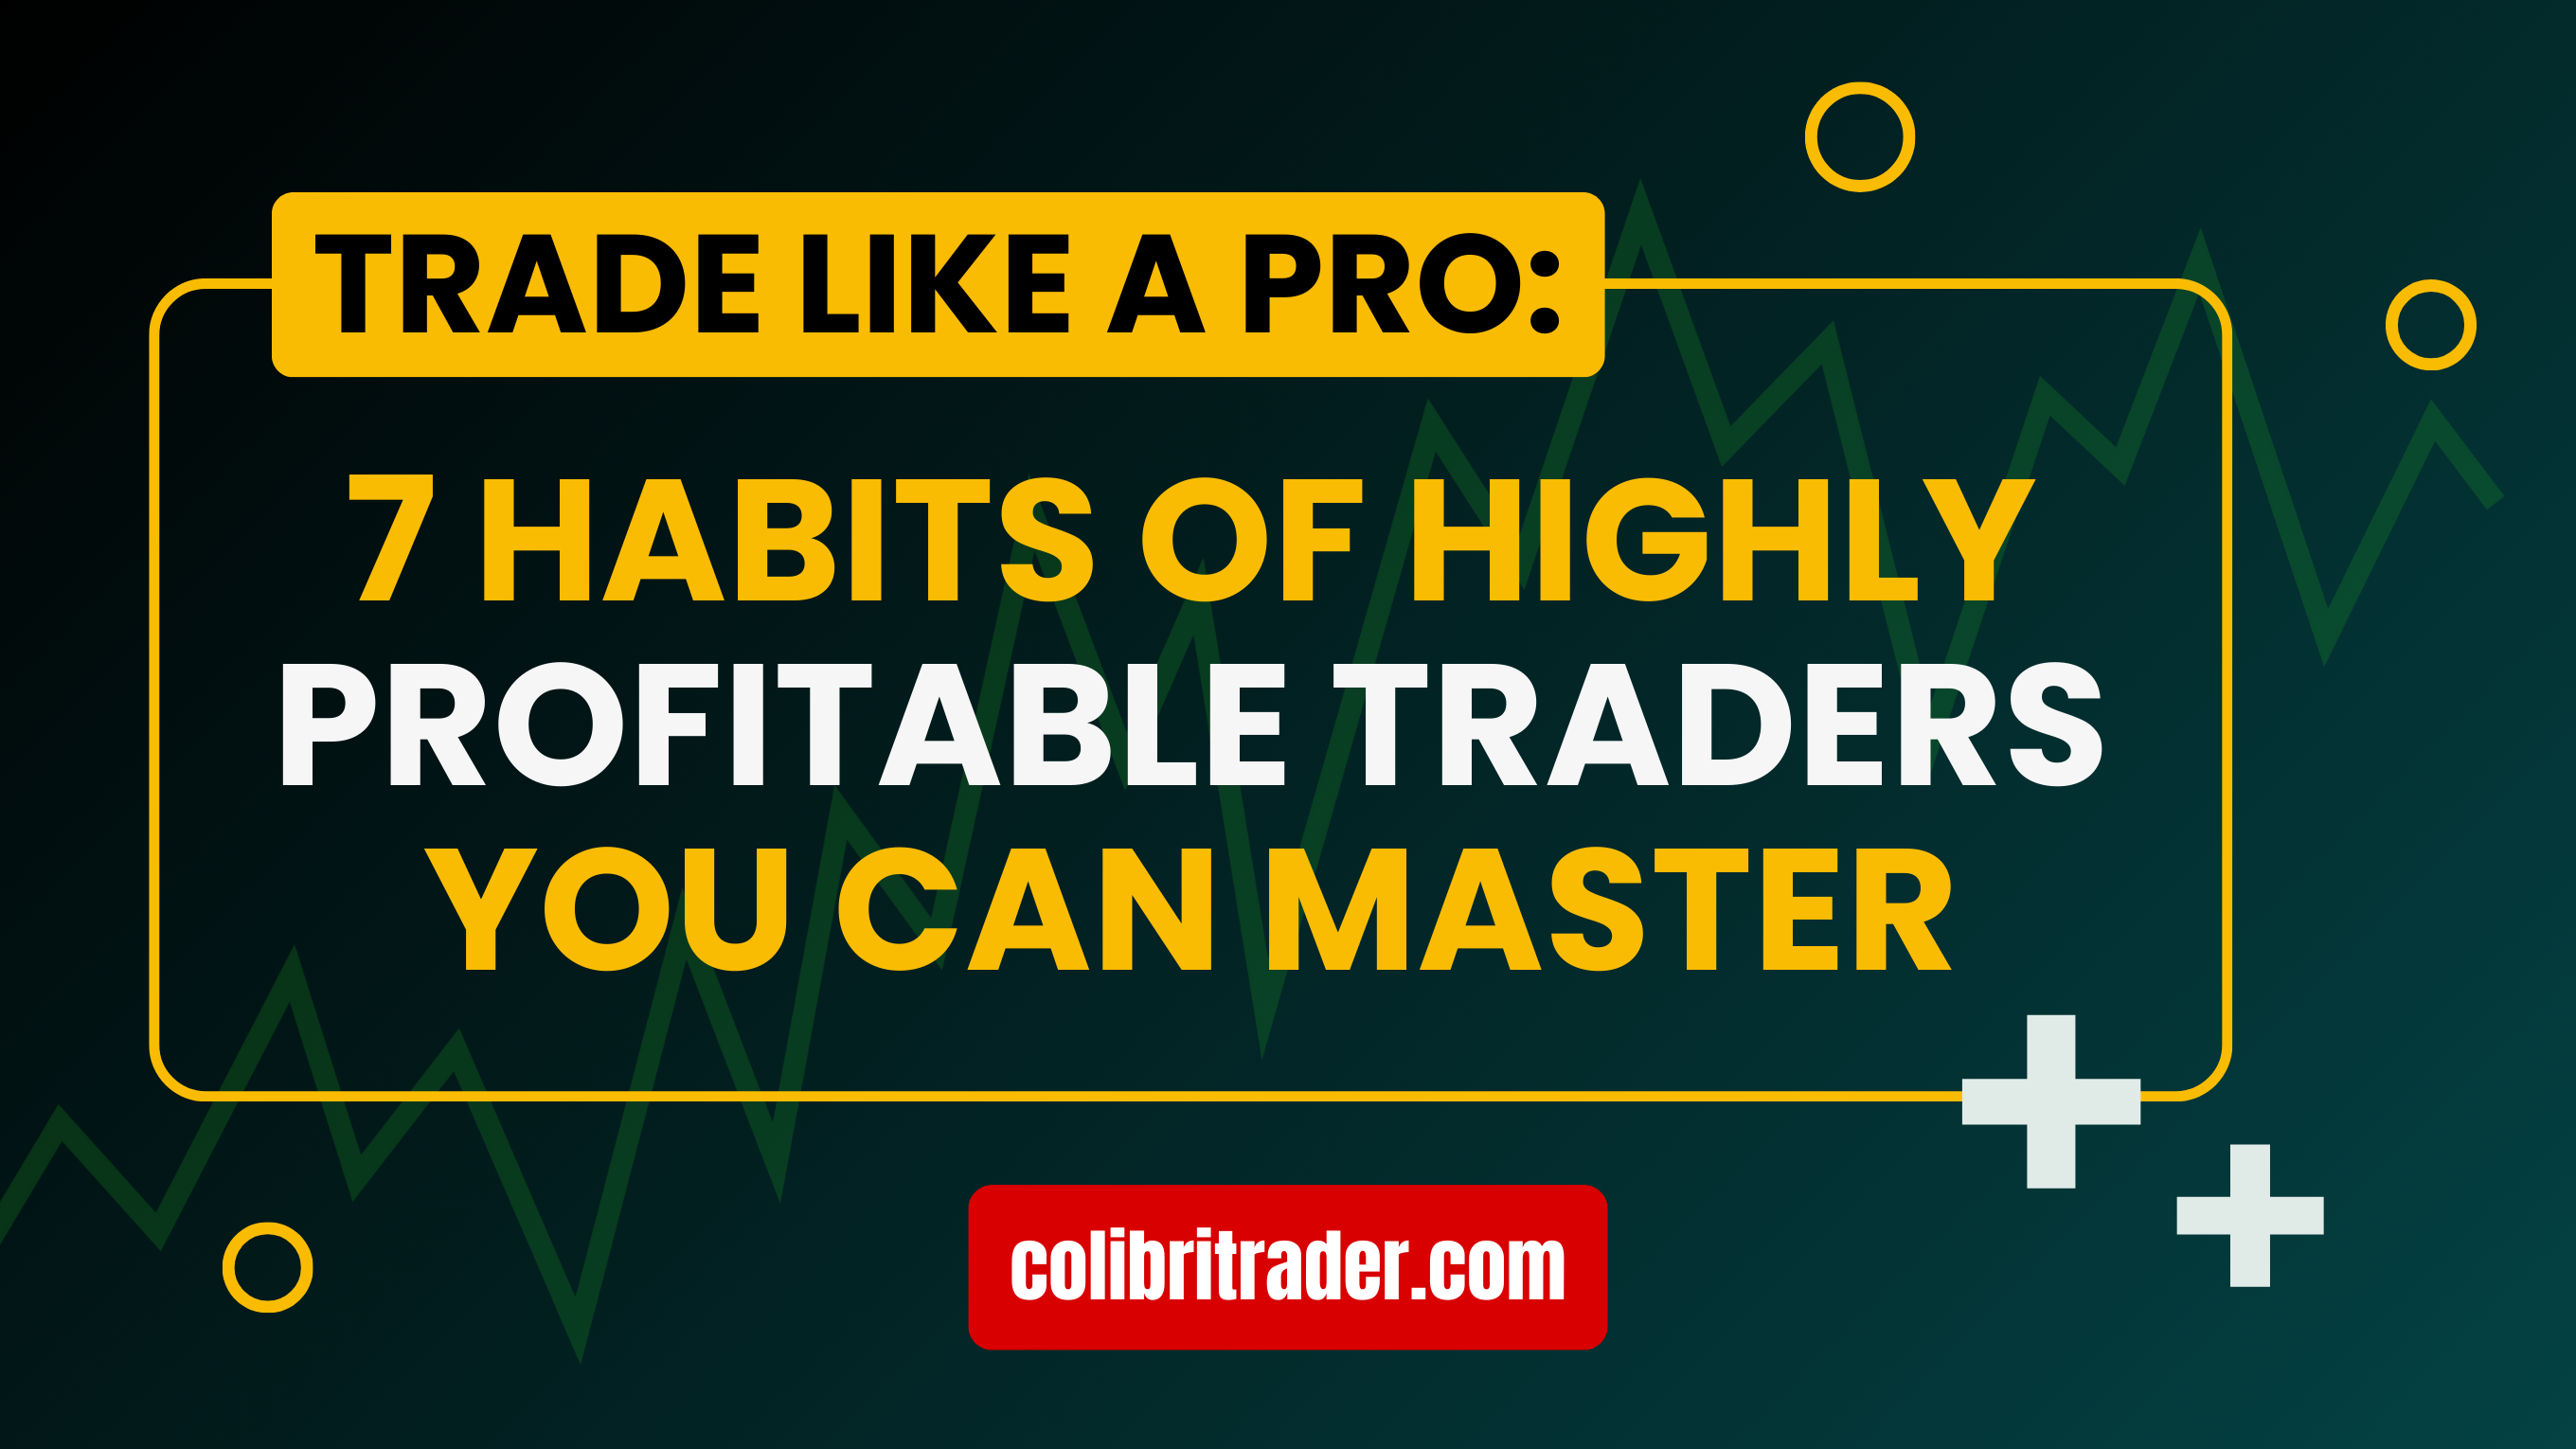 Trade Like a Pro: 7 Habits of Highly Profitable Traders You Can Master